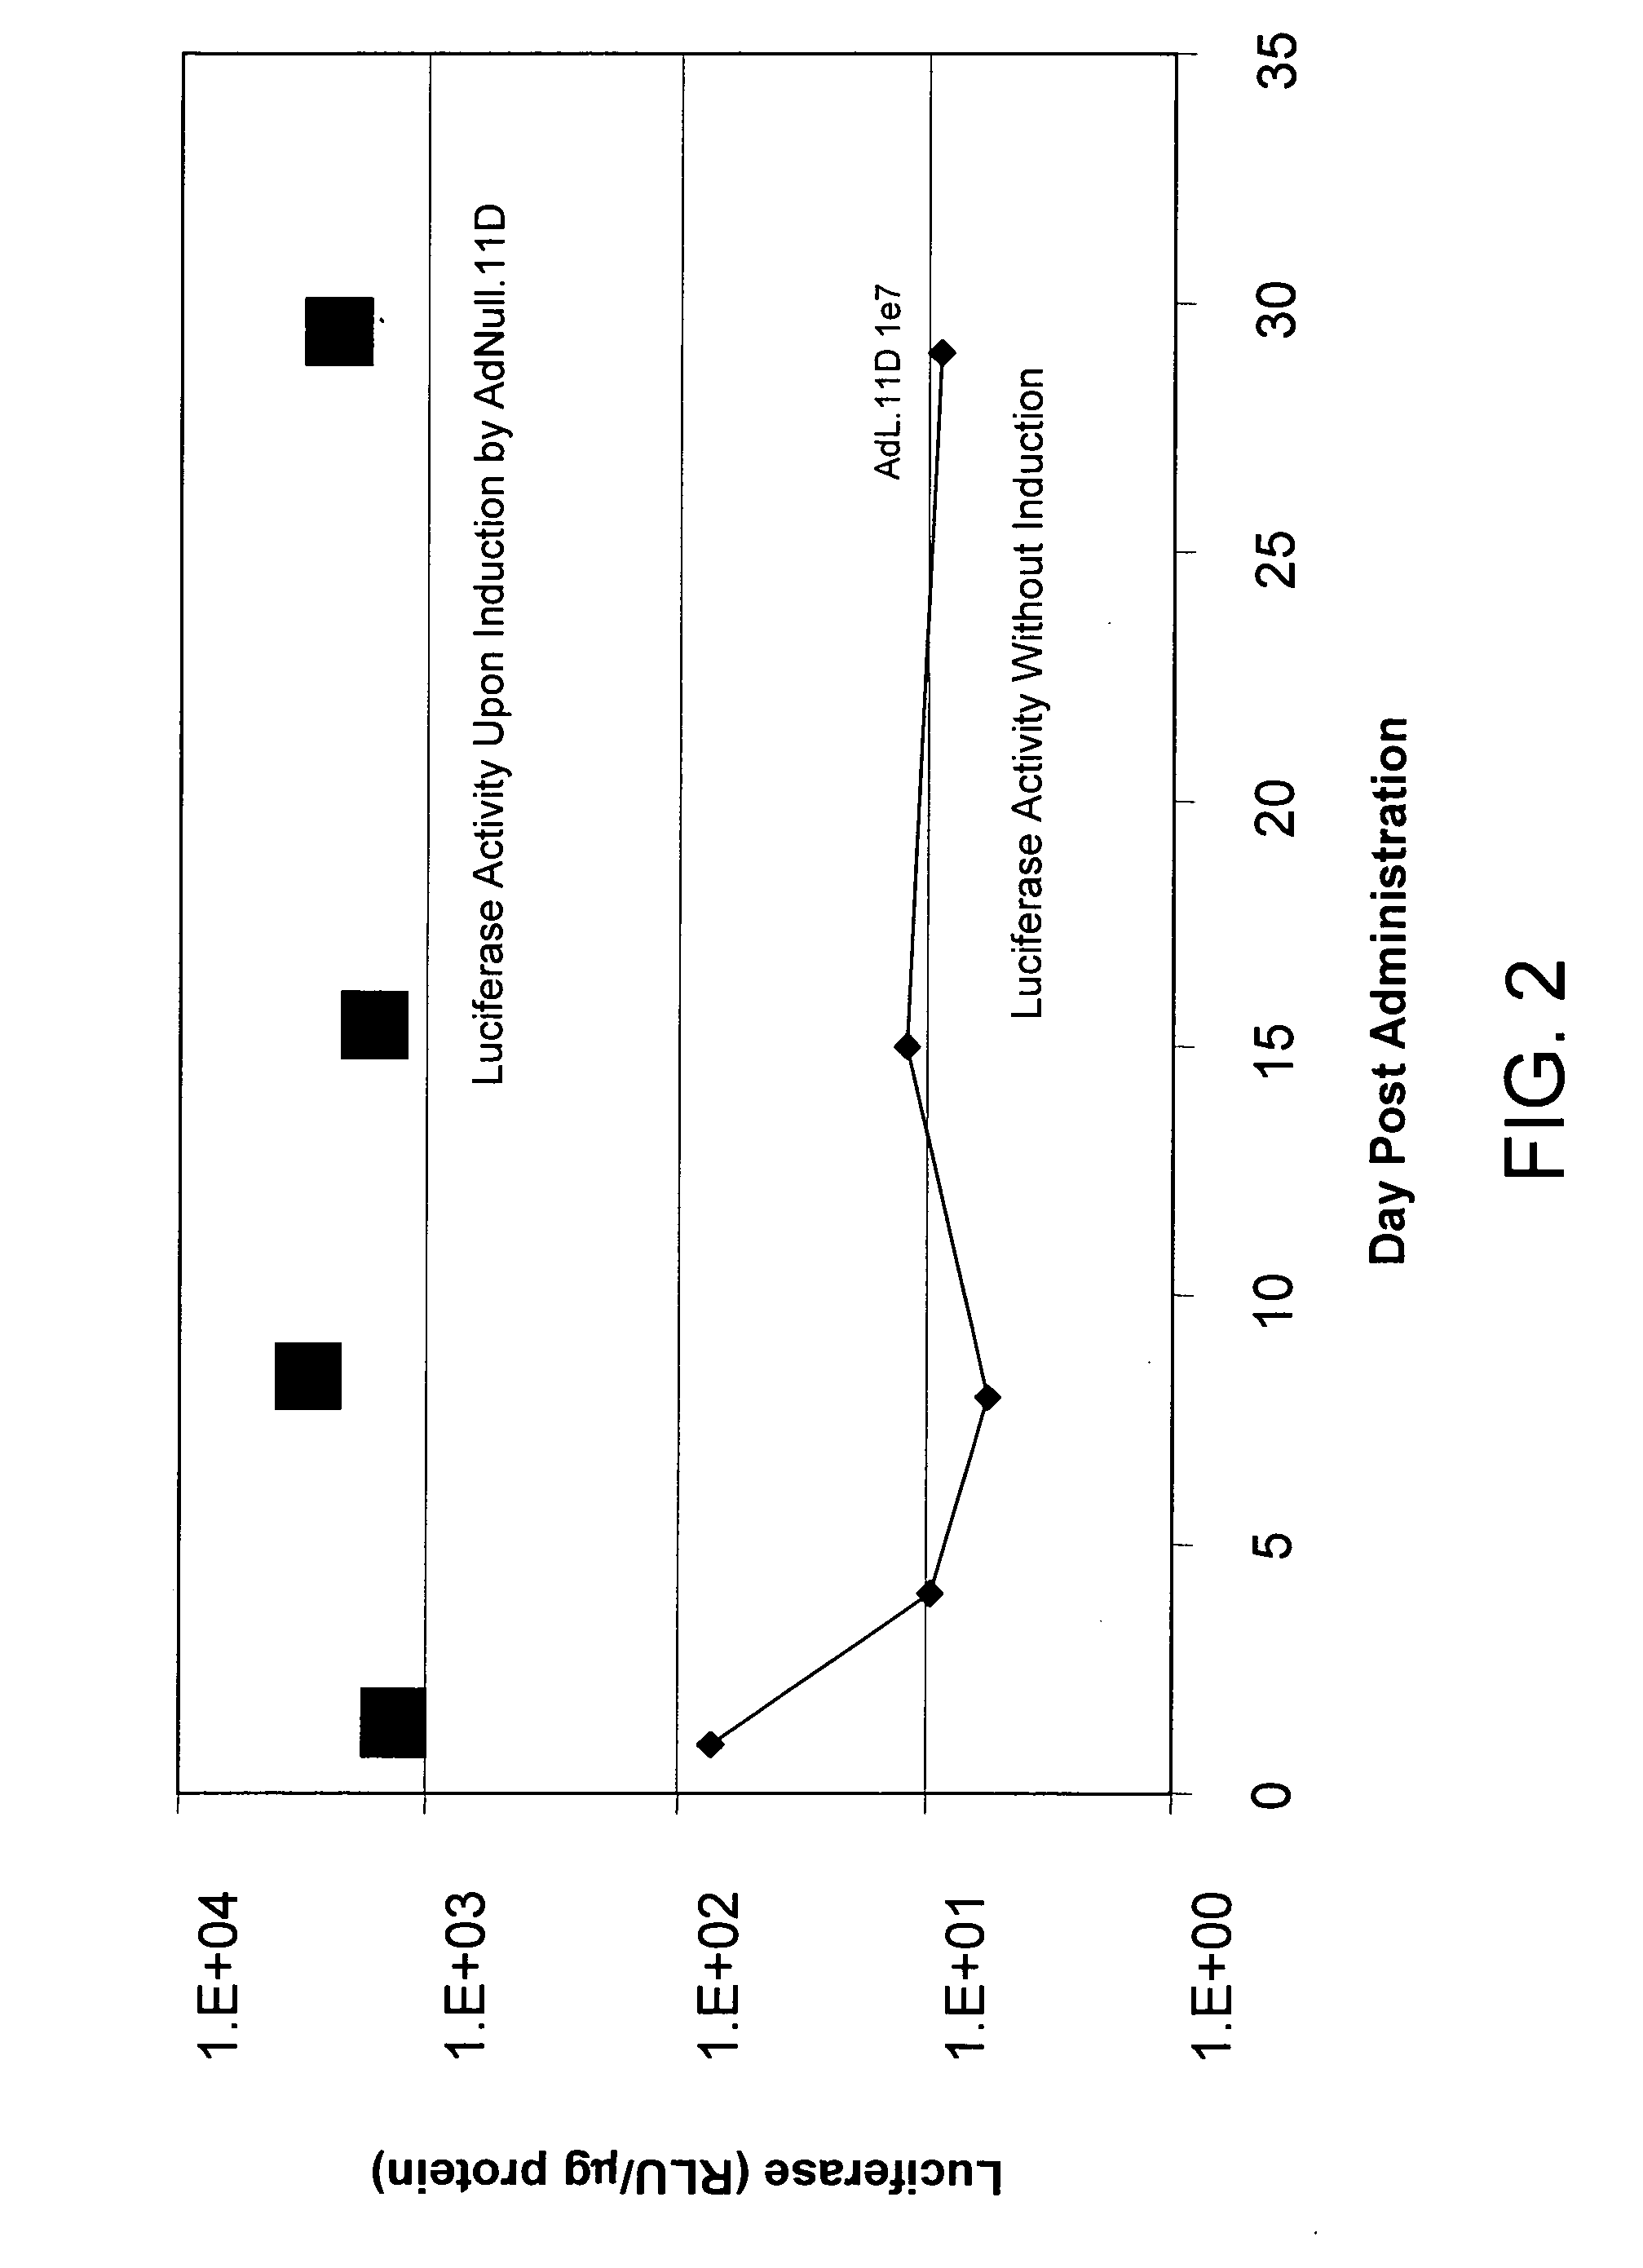 Materials and methods for treating vascular leakage in the eye